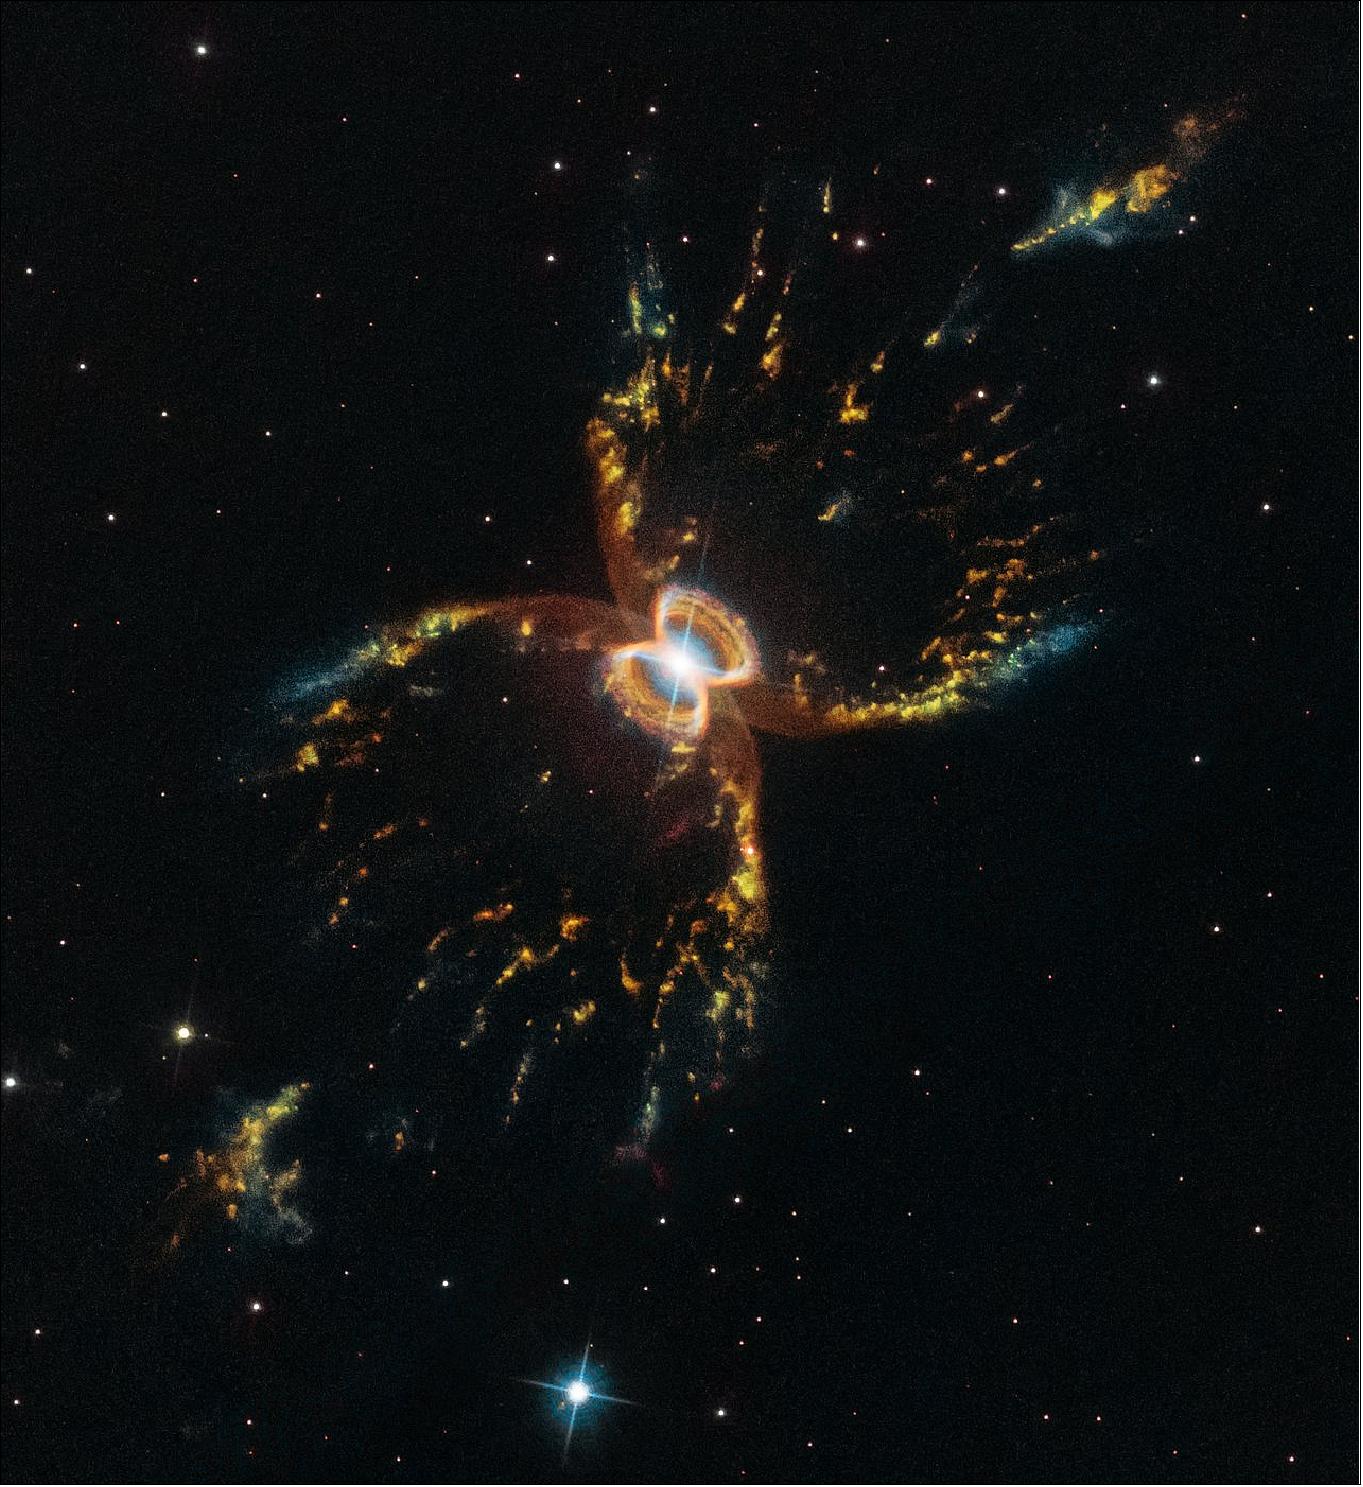 Figure 59: This incredible image of the hourglass-shaped Southern Crab Nebula was taken to mark the NASA/ESA Hubble Space Telescope's 29th anniversary in space. The nebula, created by a binary star system, is one of the many objects that Hubble has demystified throughout its productive life. This new image adds to our understanding of the nebula and demonstrates the telescope's continued capabilities (image credit: NASA, ESA, and STScI, CC BY 4.0)